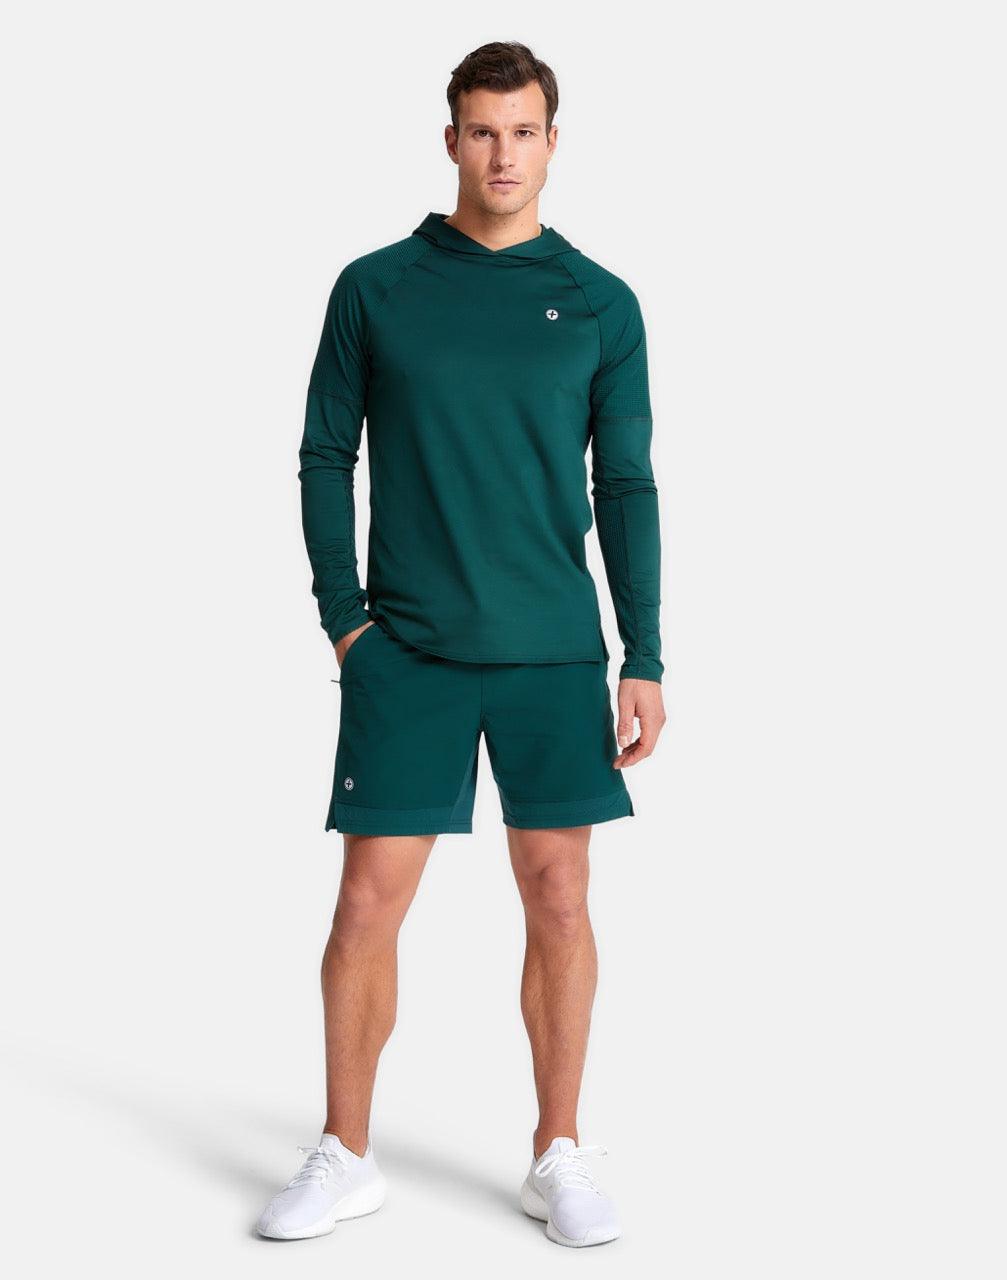 Celero Hooded Long Sleeve in Pine Green - Mid Layer - Gym+Coffee